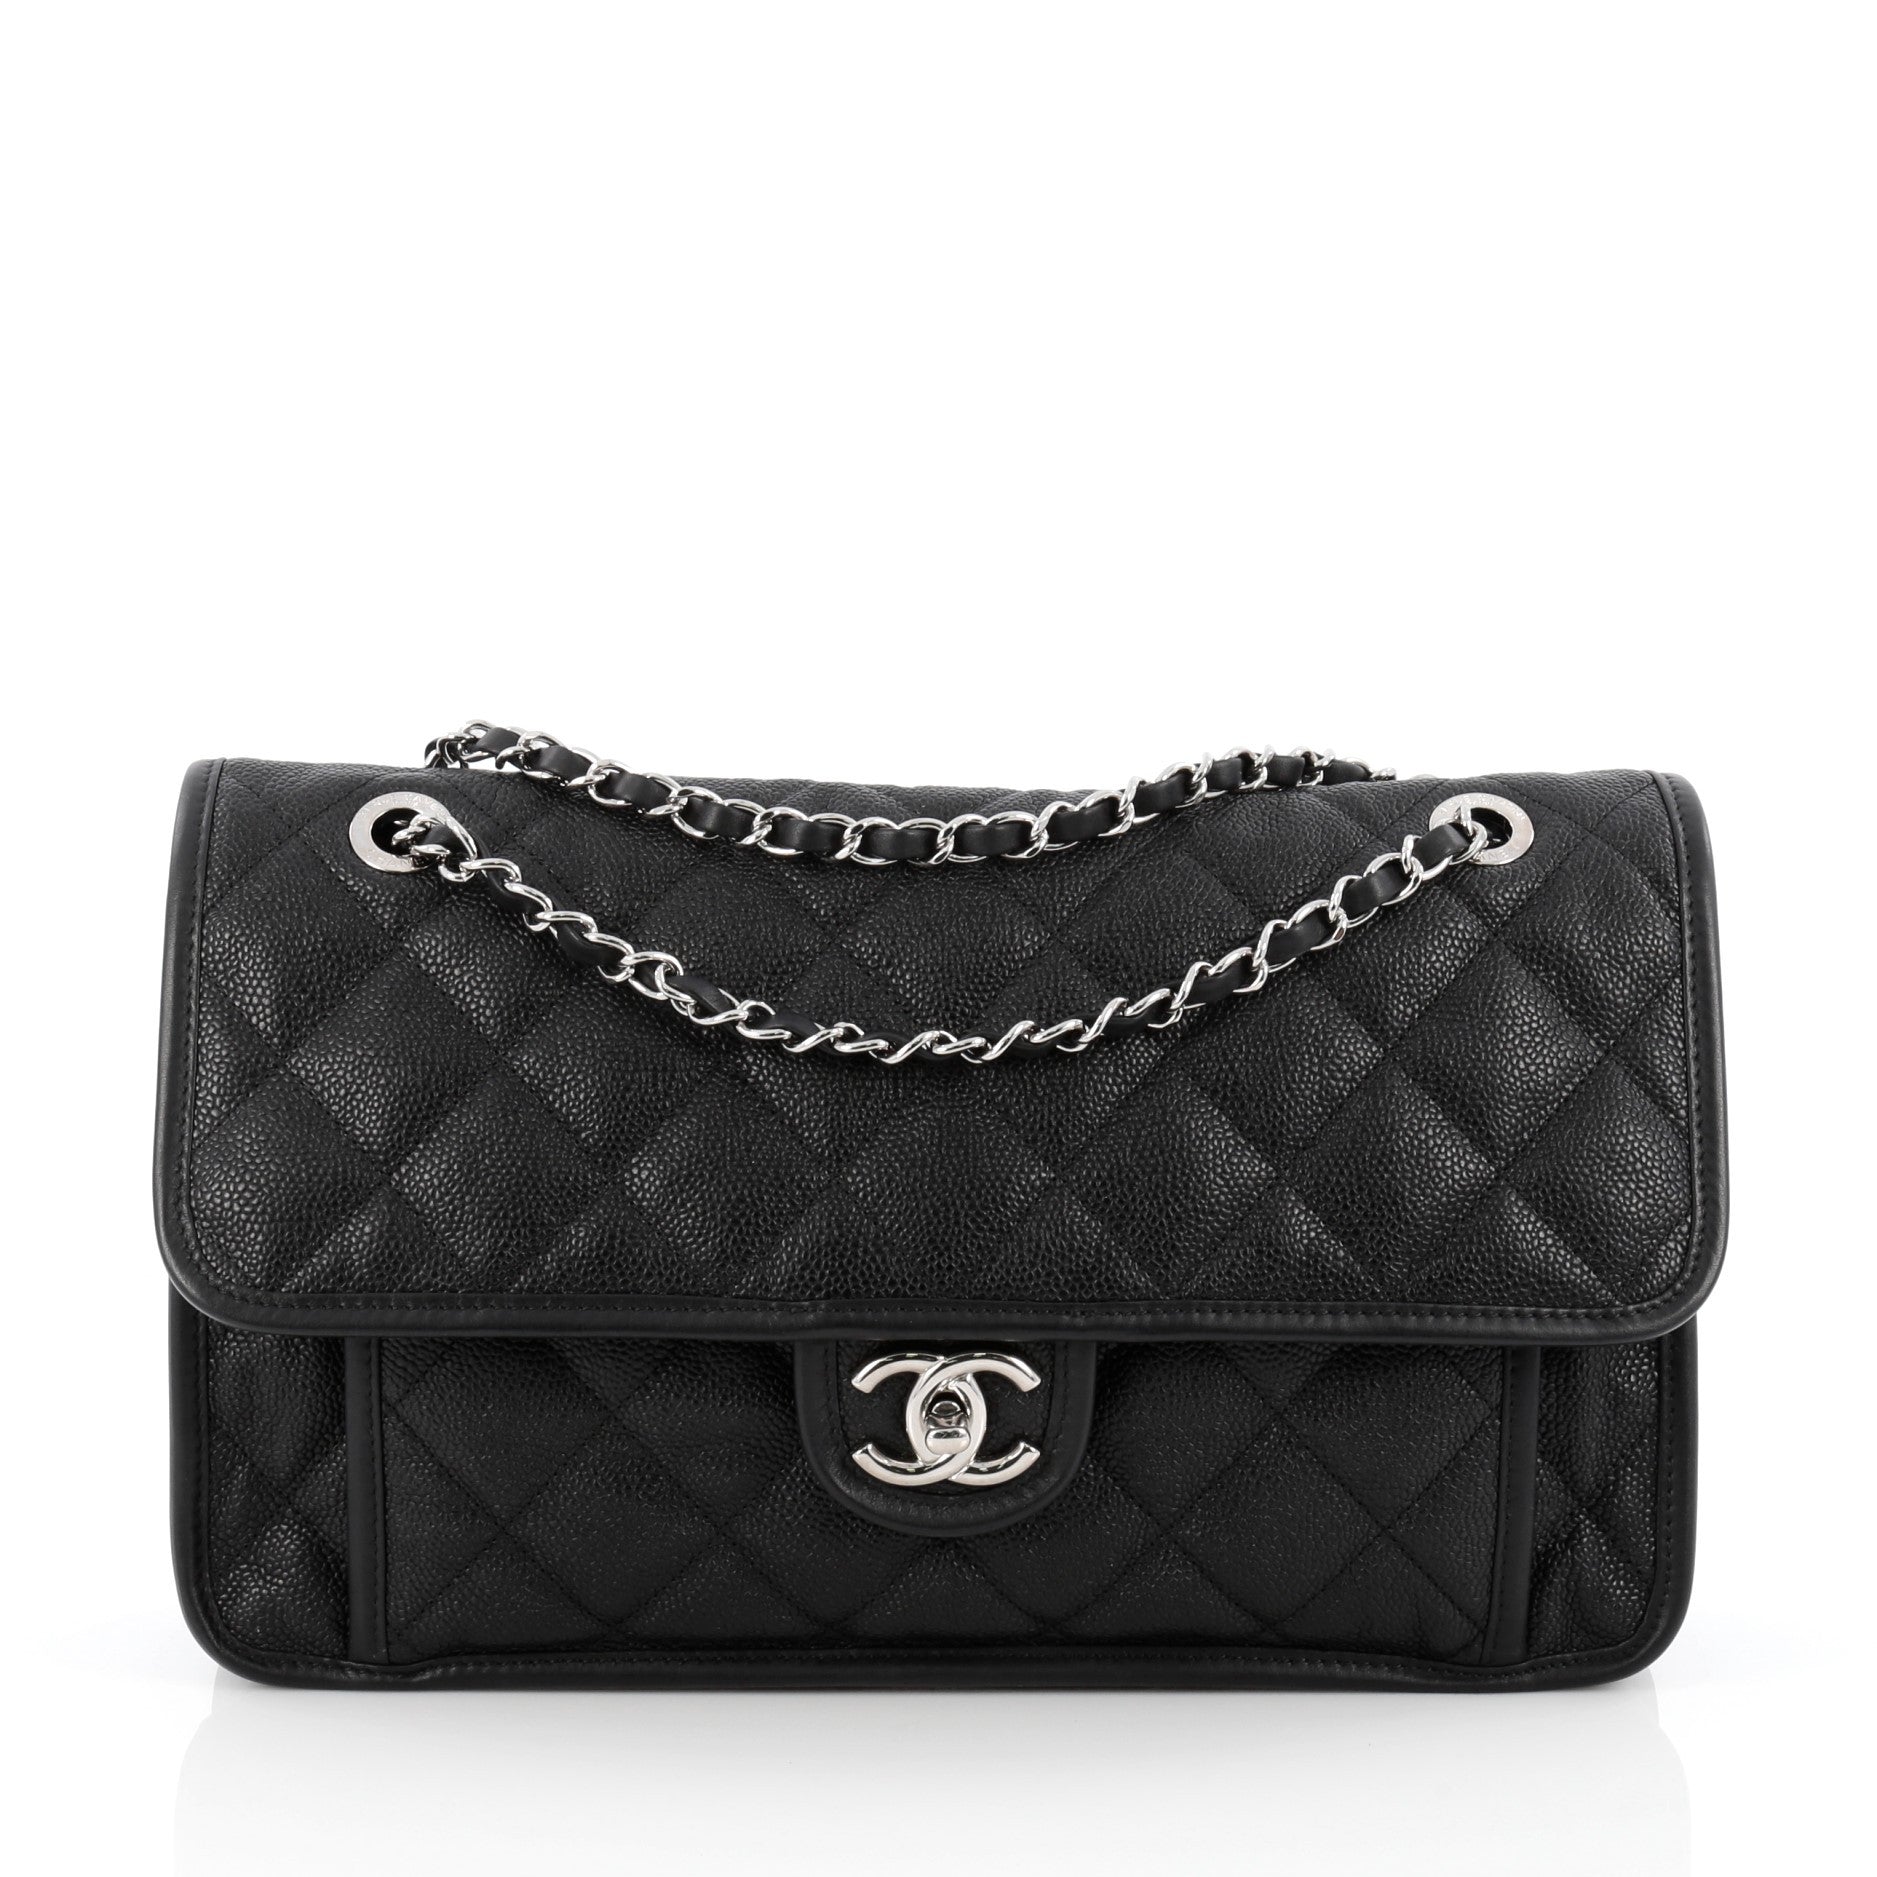 16619-01_Chanel_French_Riviera_Flap_Bag_Quilted_Ca_2D_0003.jpg?v=1575946869